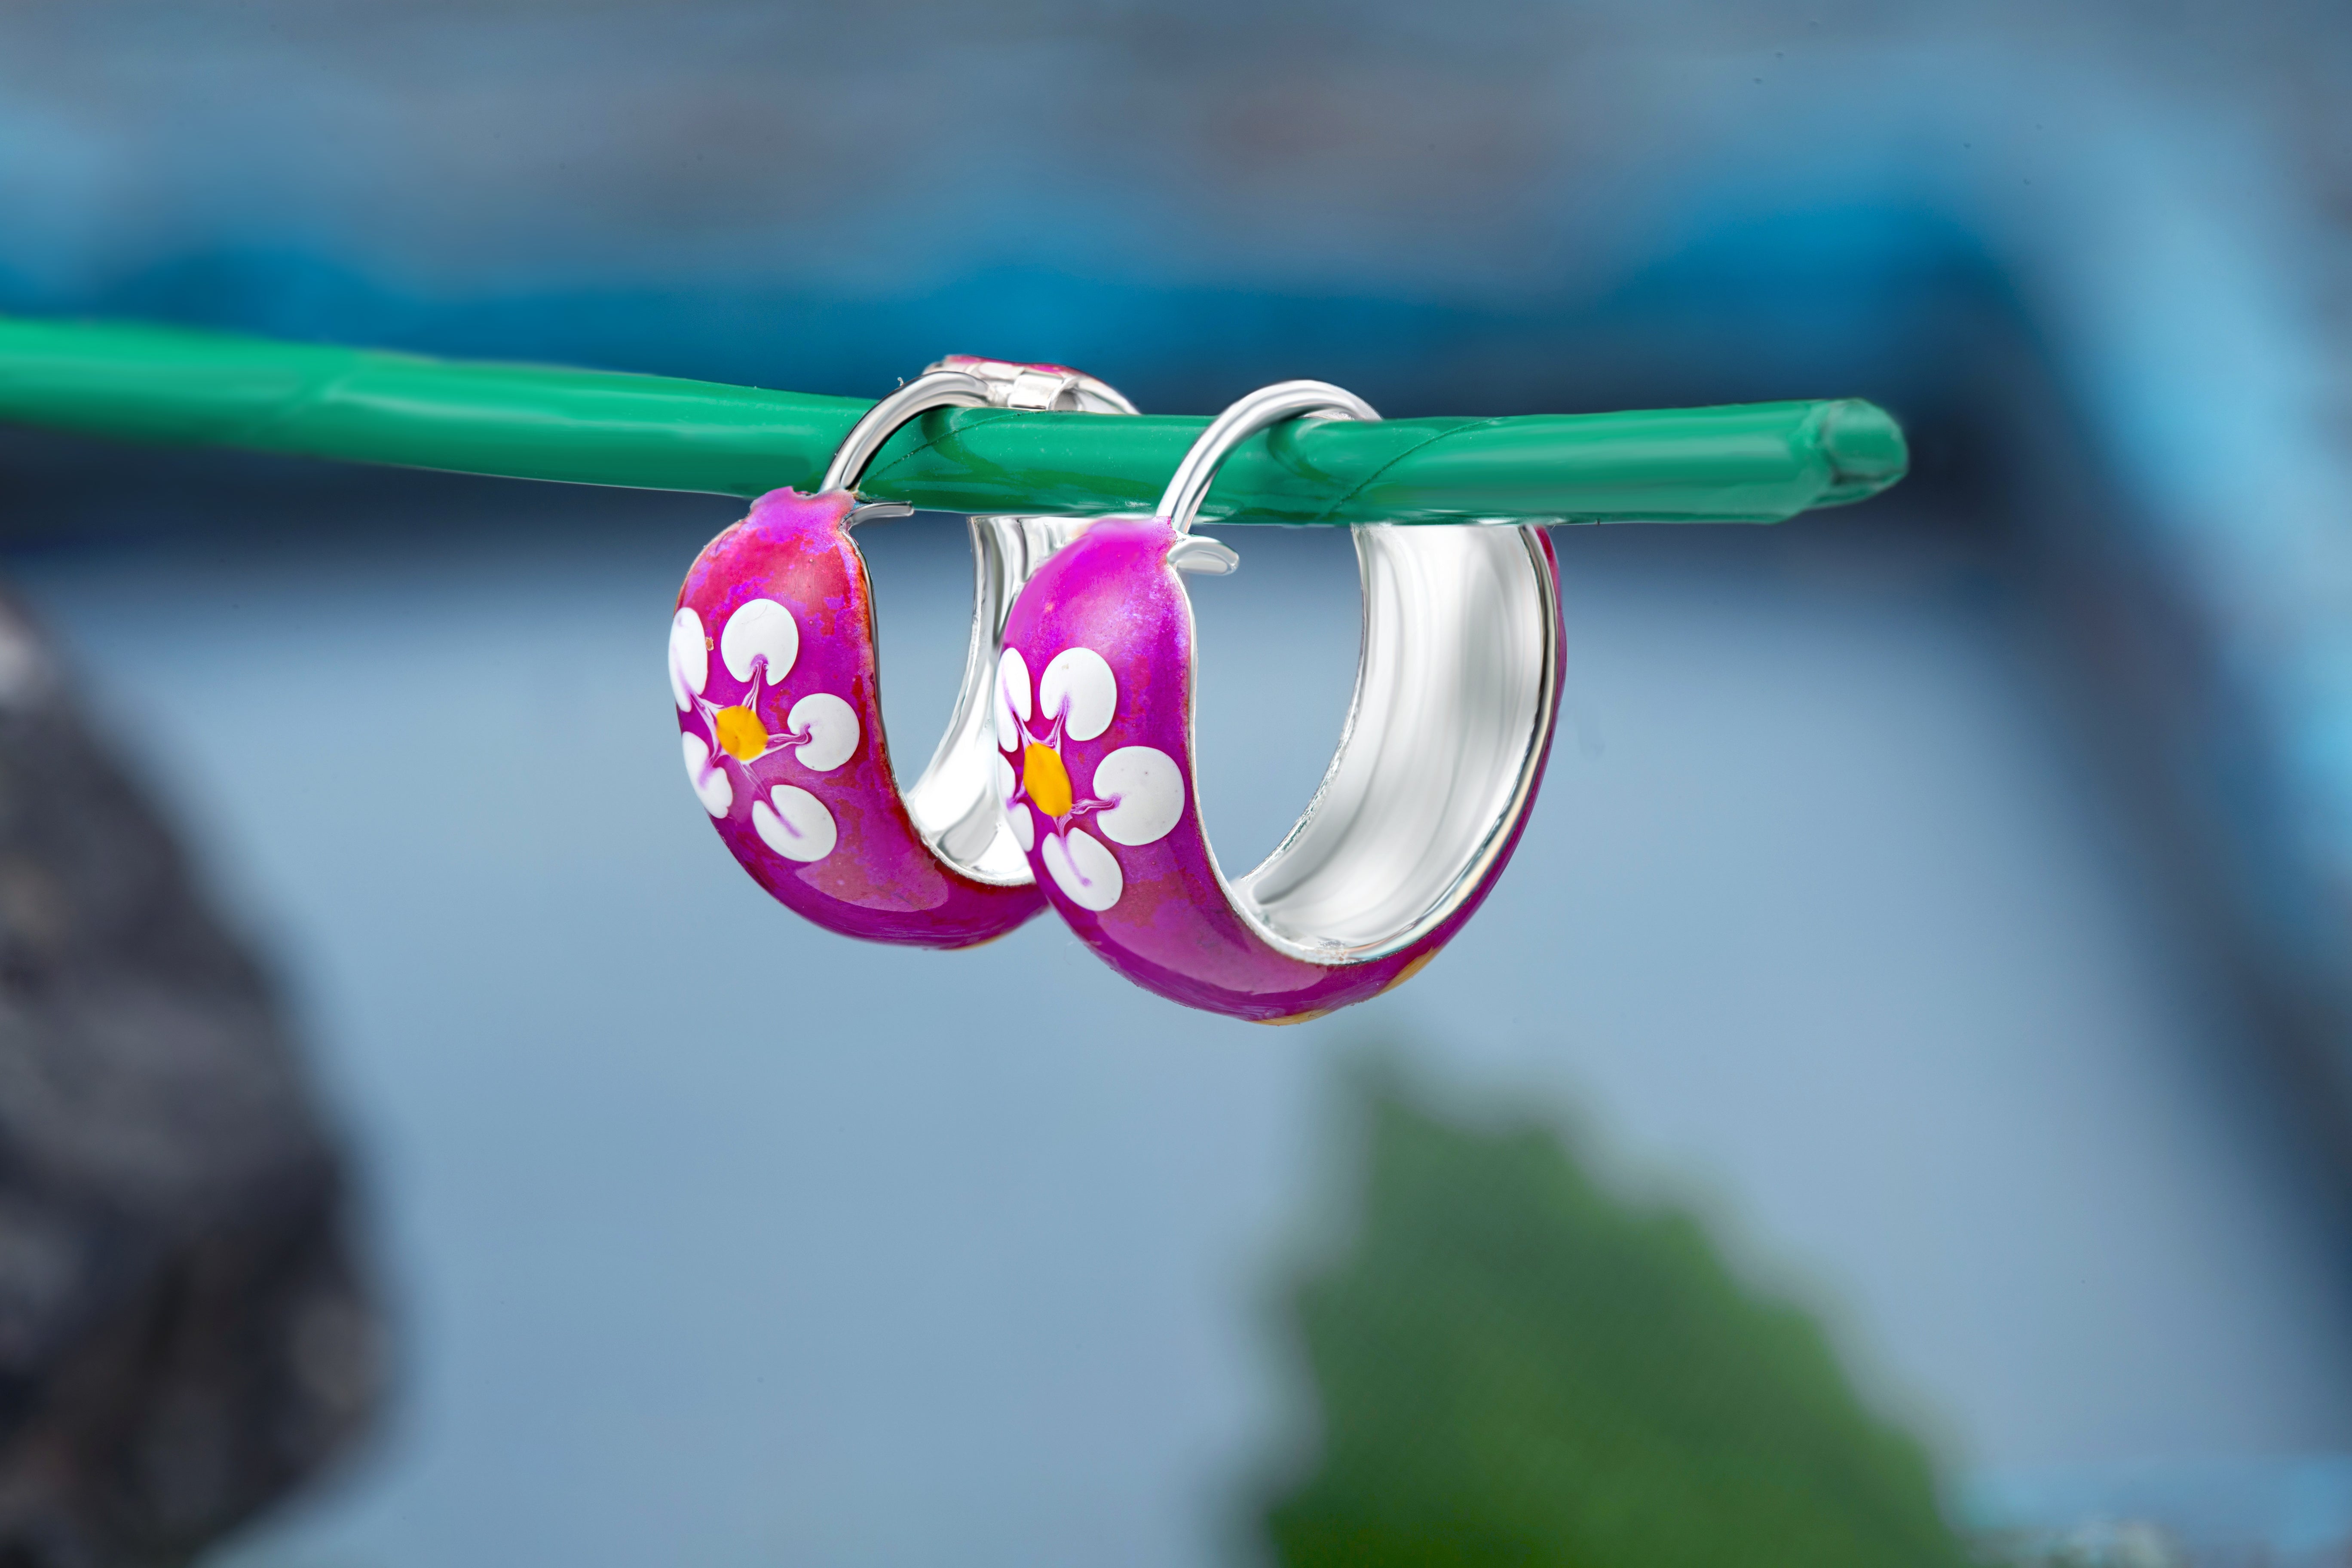 92.5 sterling silver hoops/baali with purple enamel and yellow printed flowers finished in silver and hinged back closure 